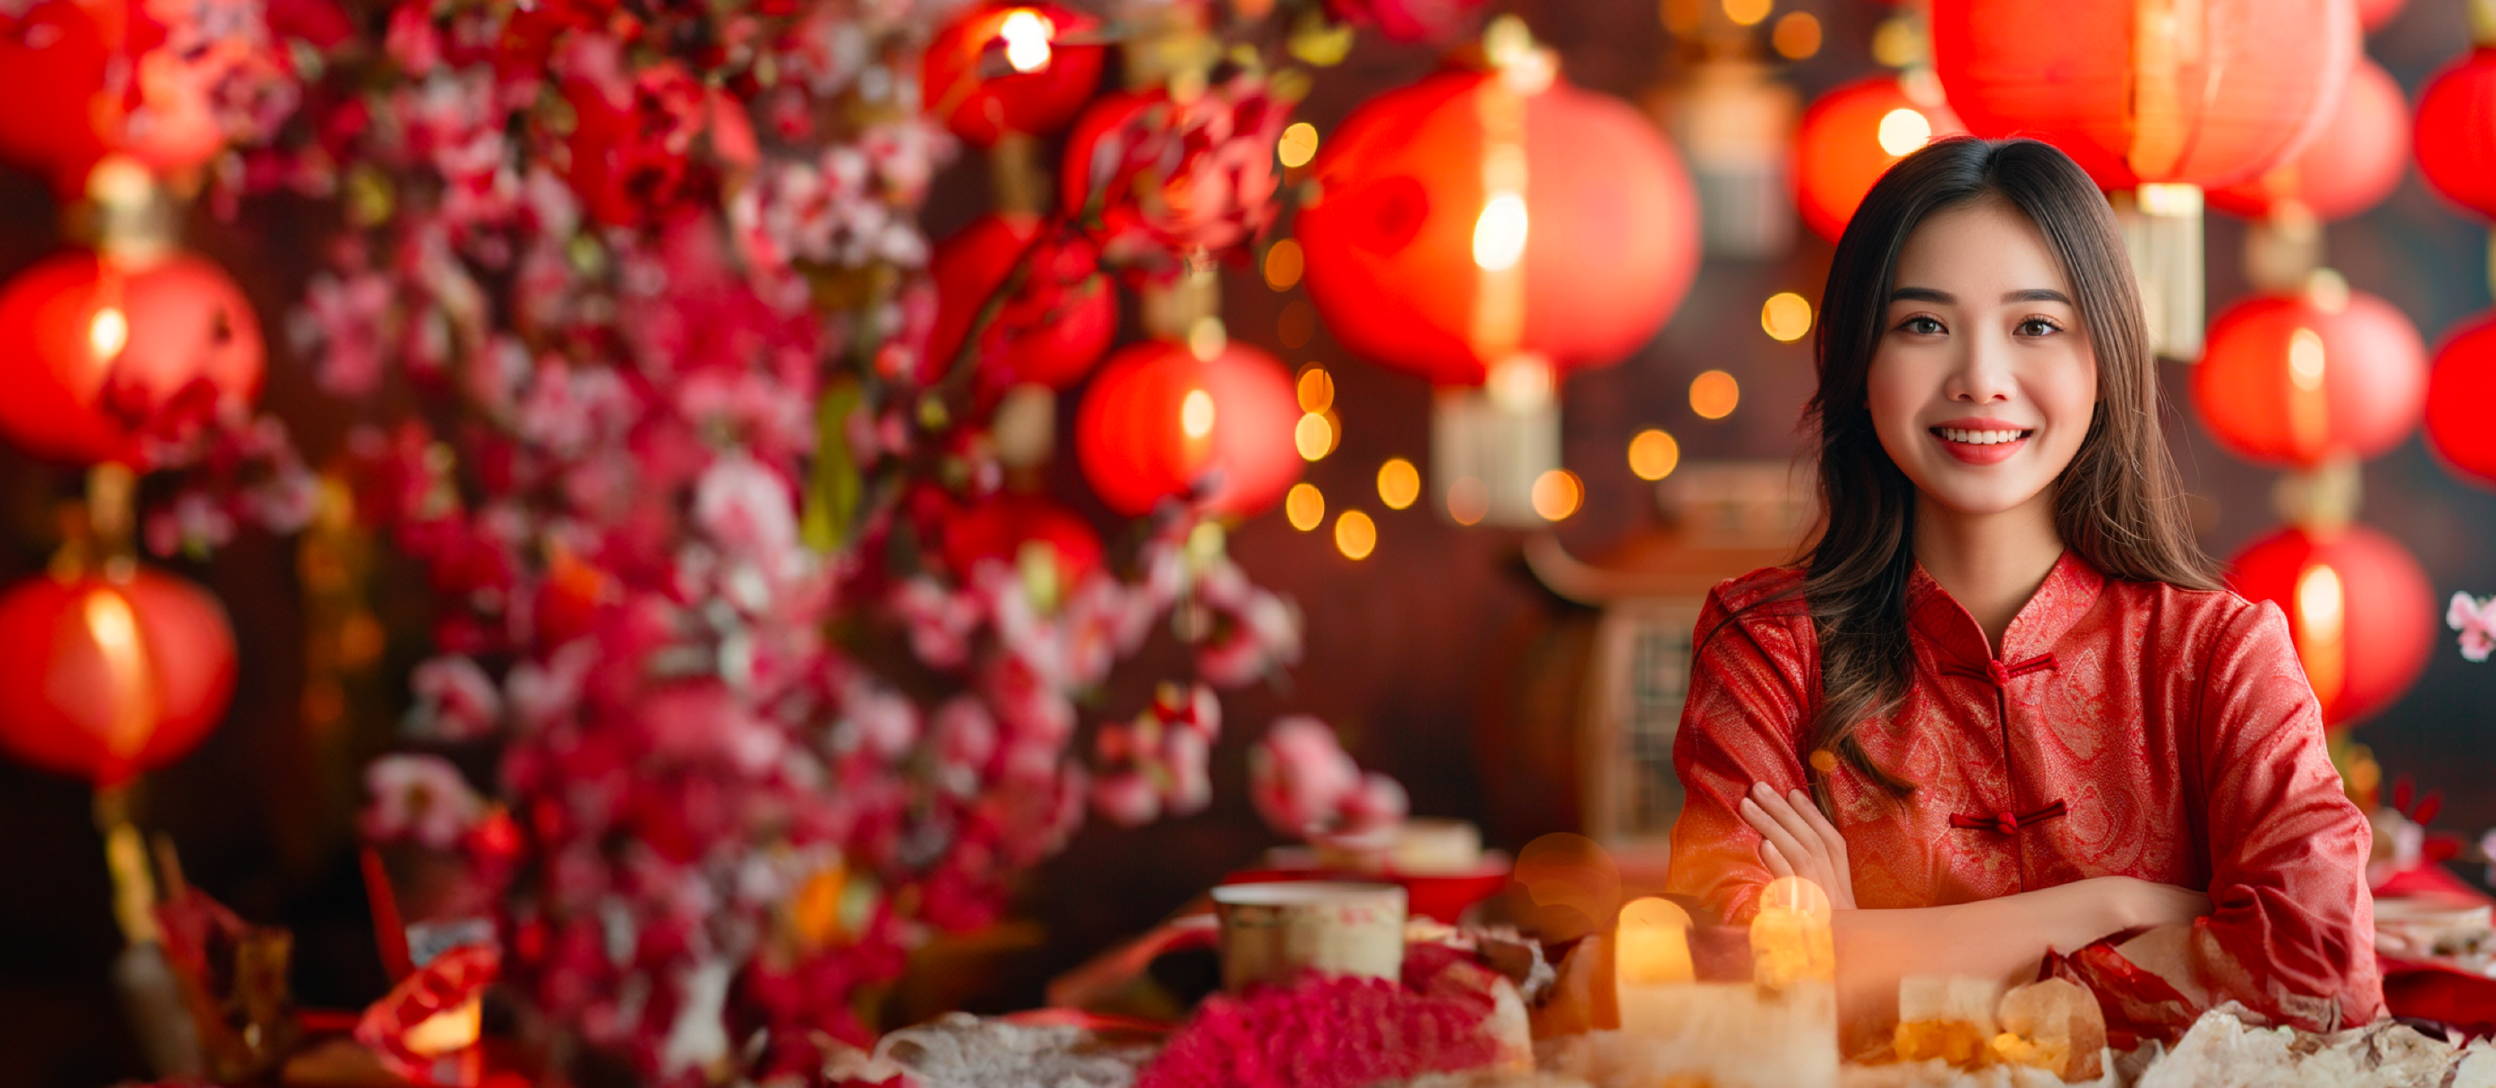 Woman in a traditional Chinese dress smiling in front of a floral arrangement and red lanterns